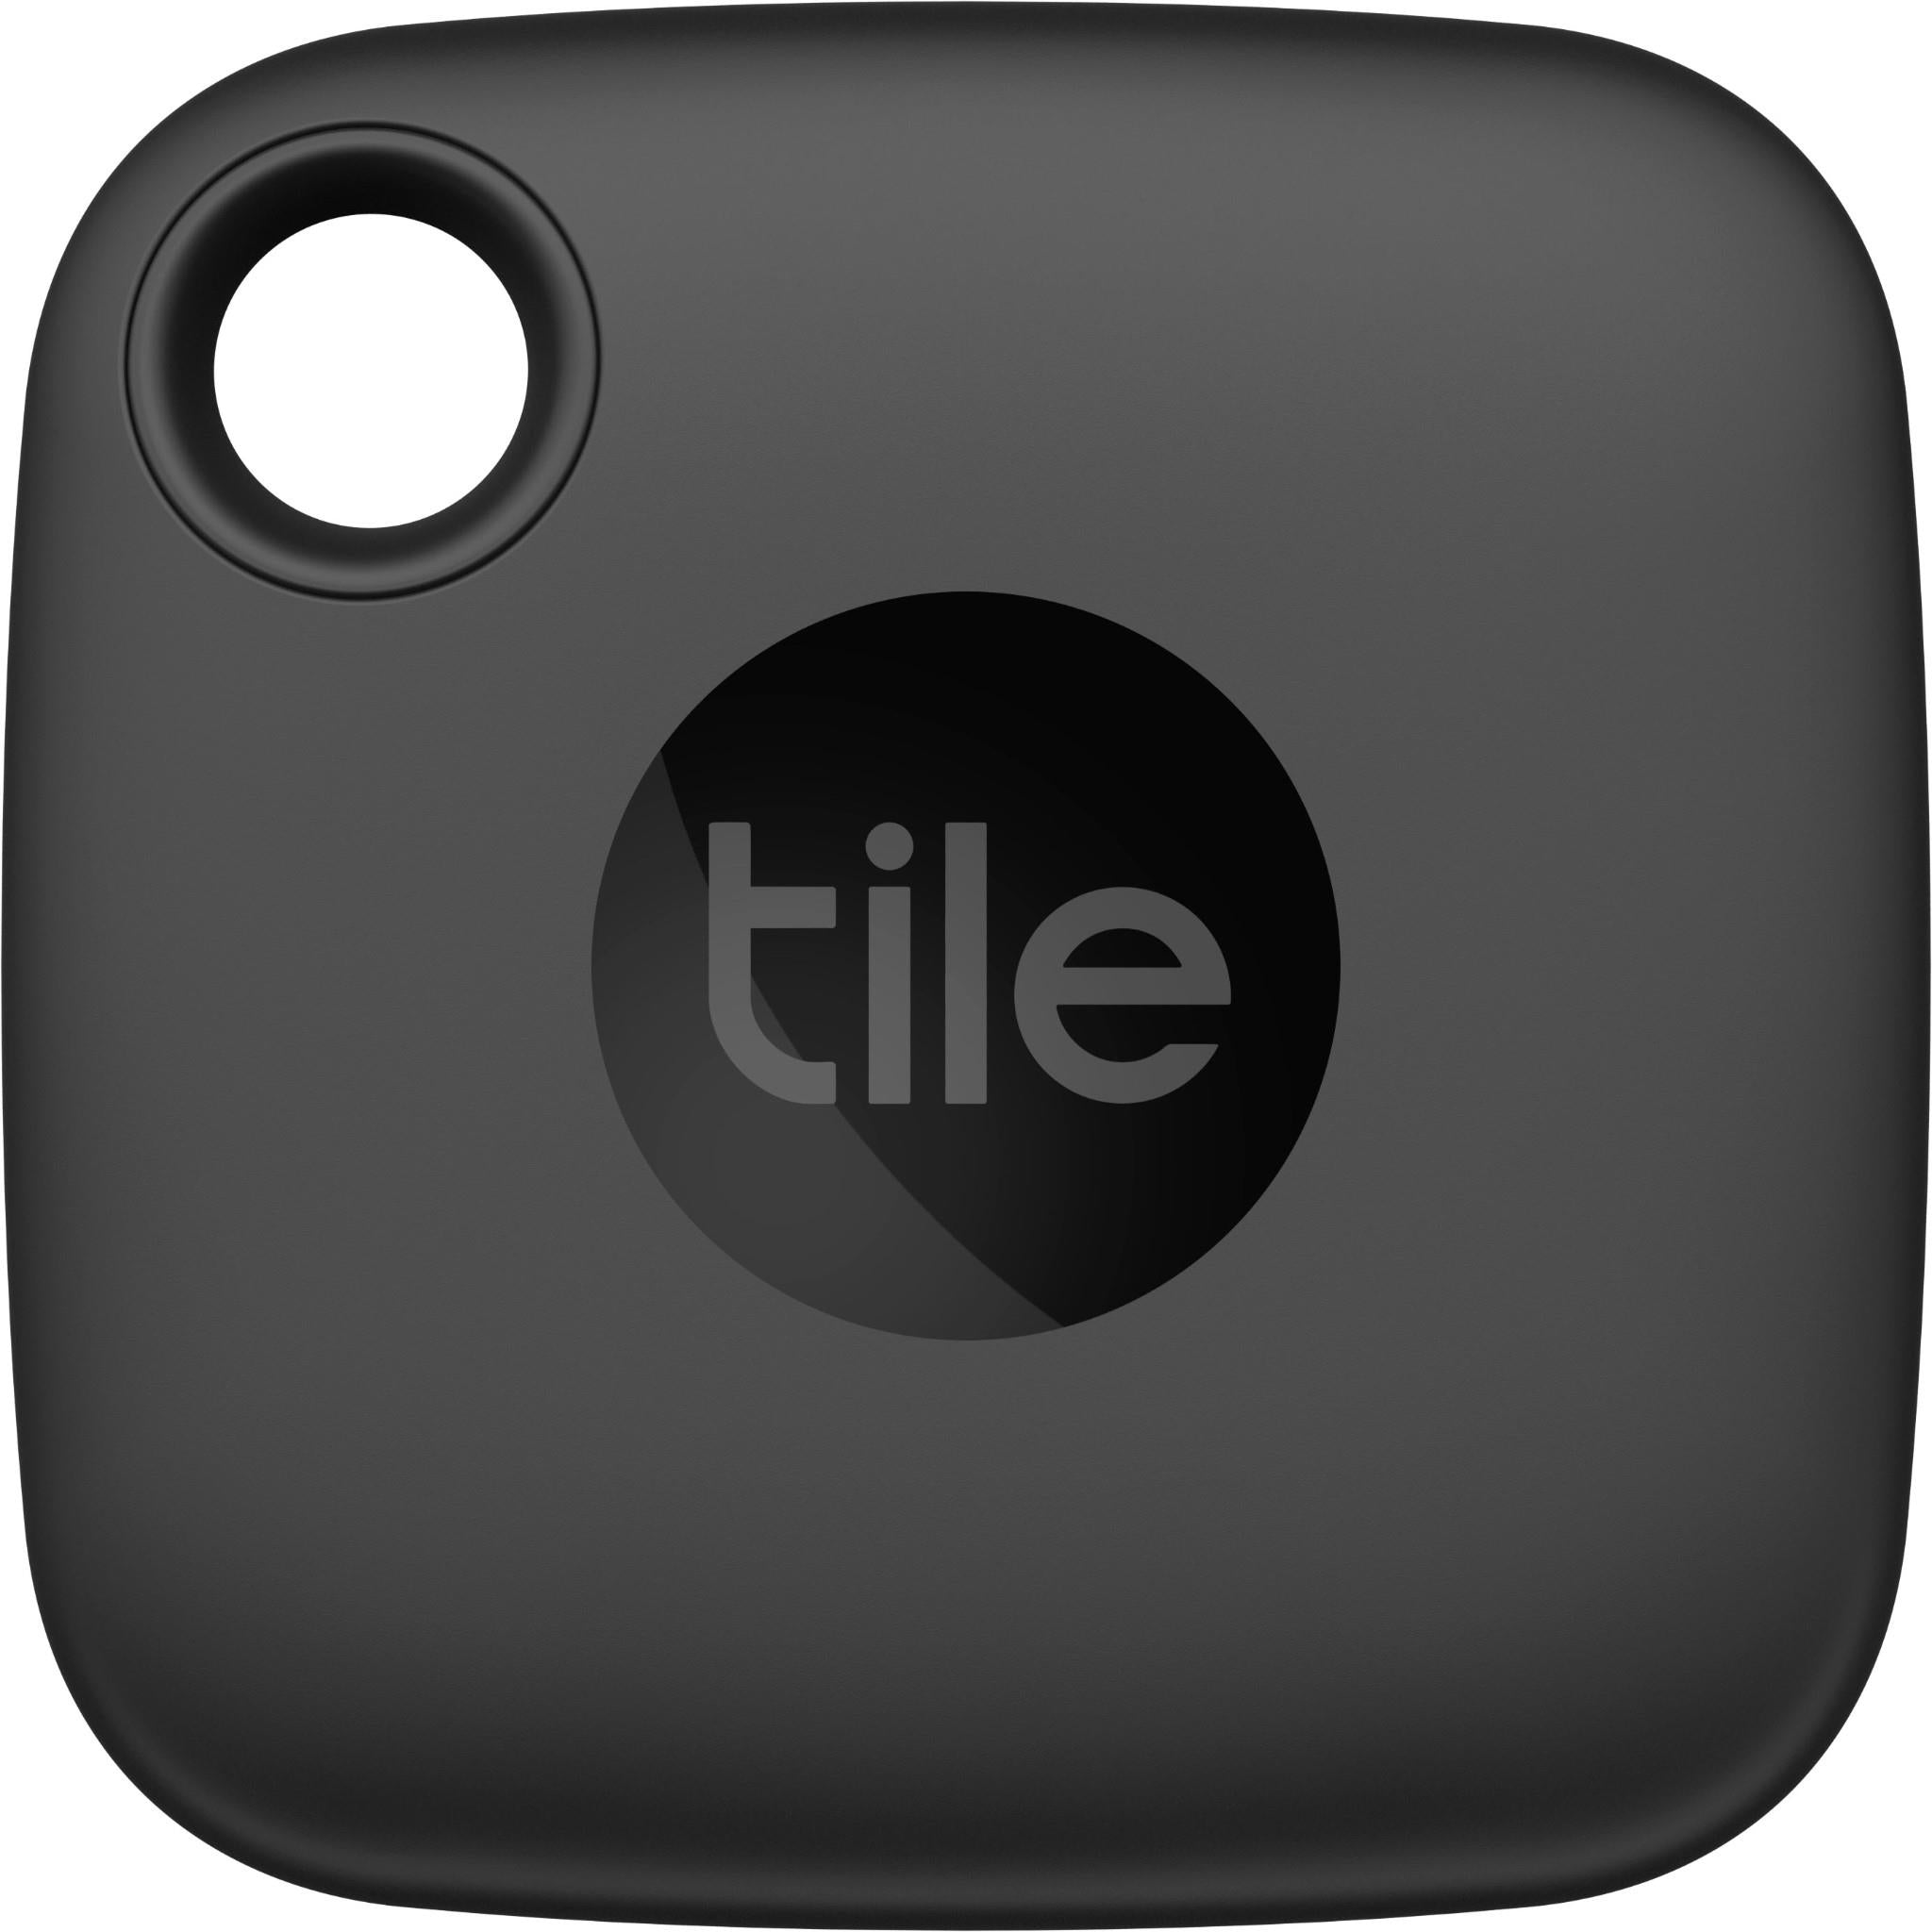 Tile Mate 1-Pack, White. Bluetooth Tracker, Keys Finder and Item Locator;  Up to 250 ft. Range. Up to 3 Year Battery. Water-Resistant. Phone Finder.